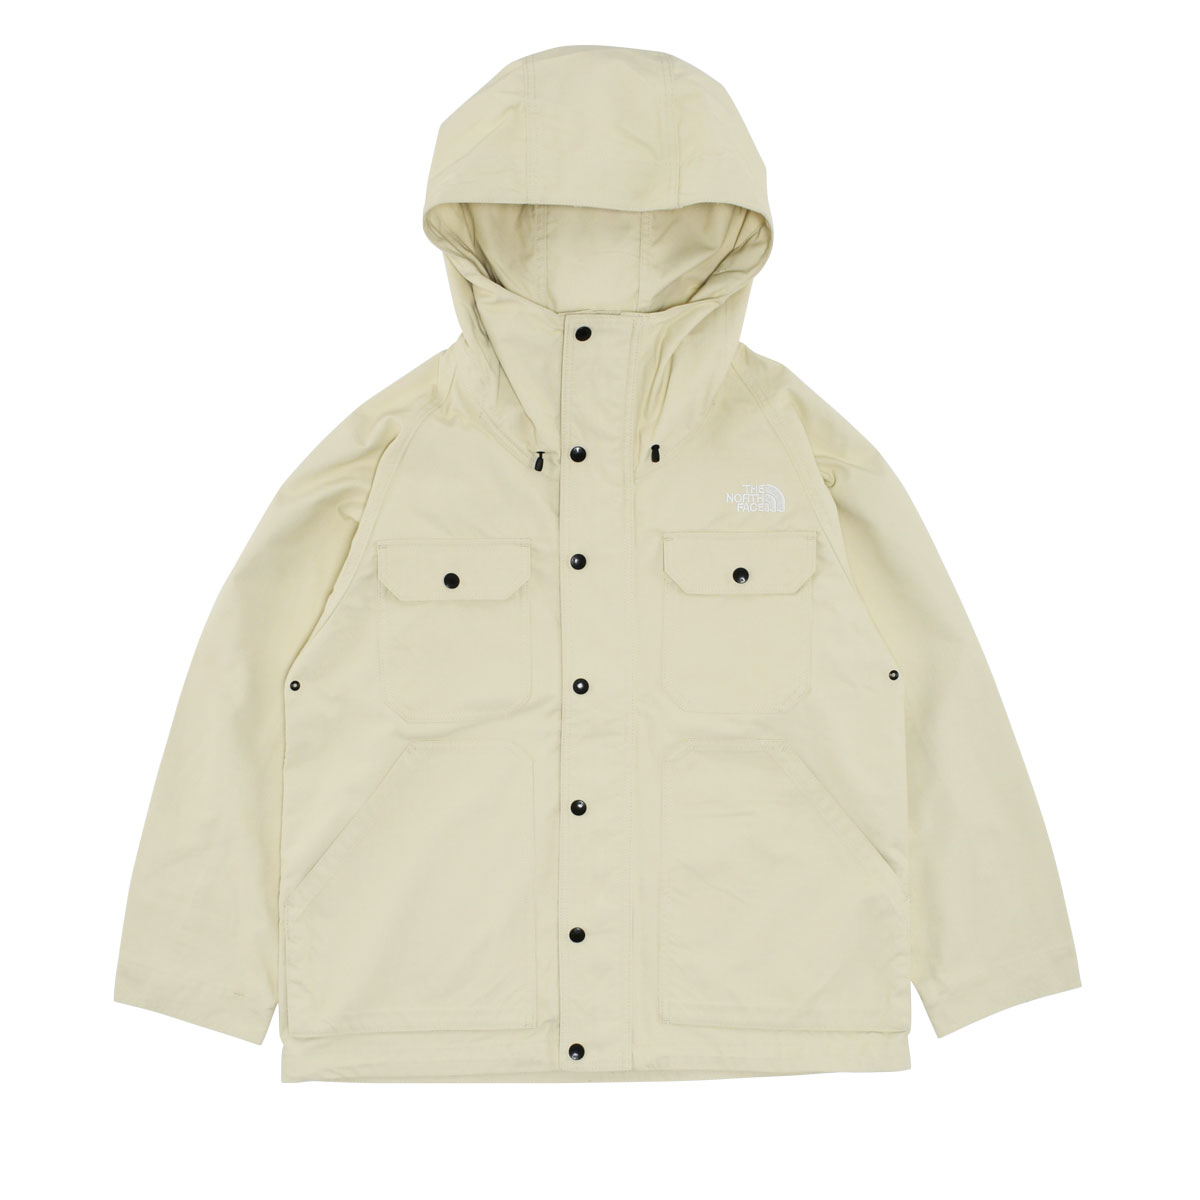 【THE NORTH FACE】(ノースフェイス) ZI MAGNE FIREFLY 